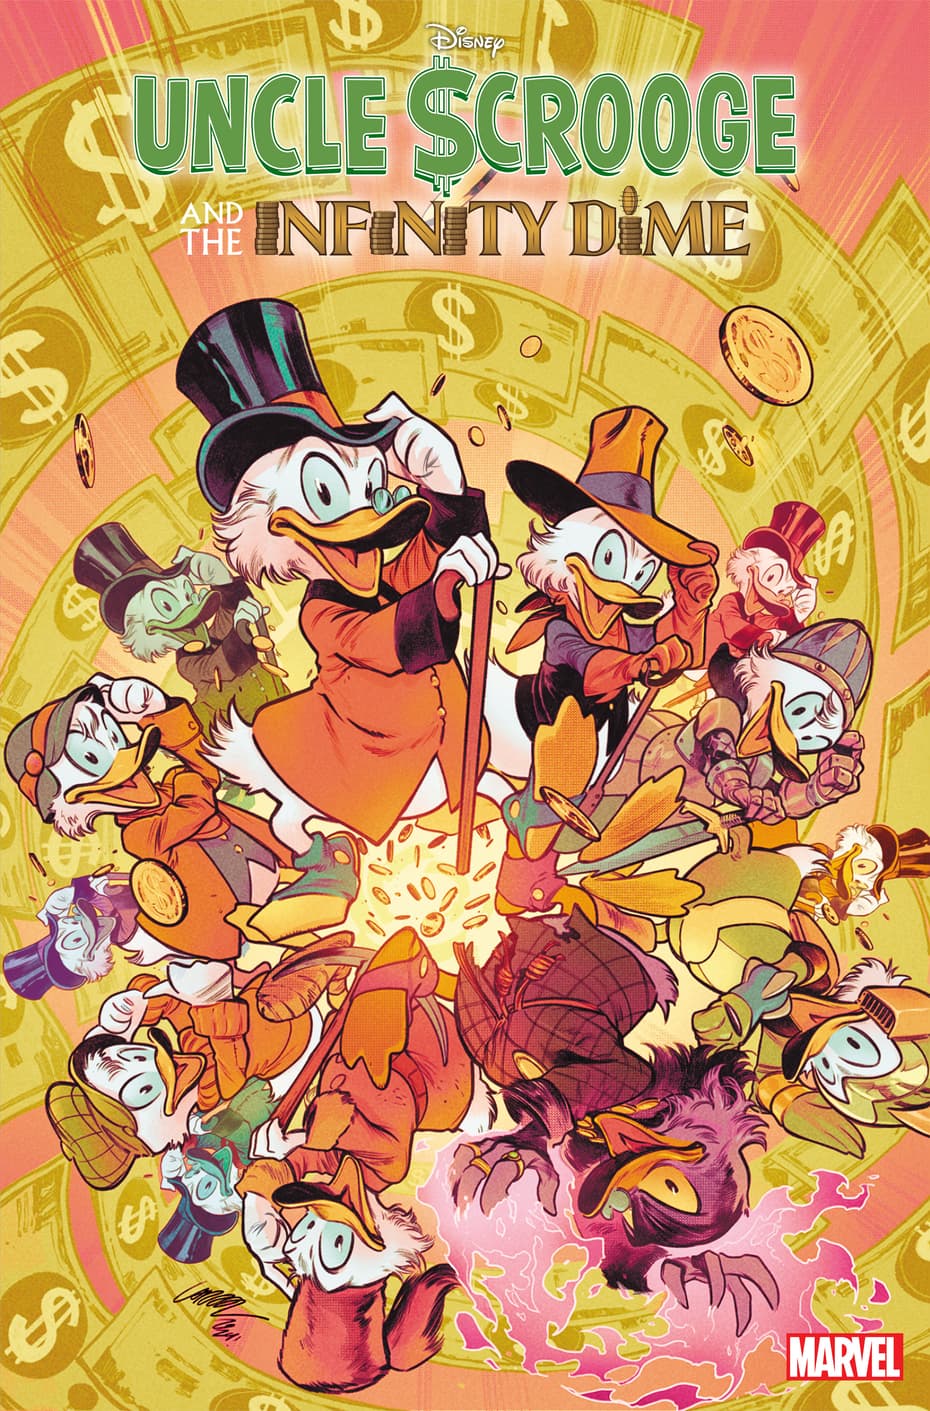 UNCLE SCROOGE AND THE INFINITY DIME #1 variant cover by Pepe Larraz